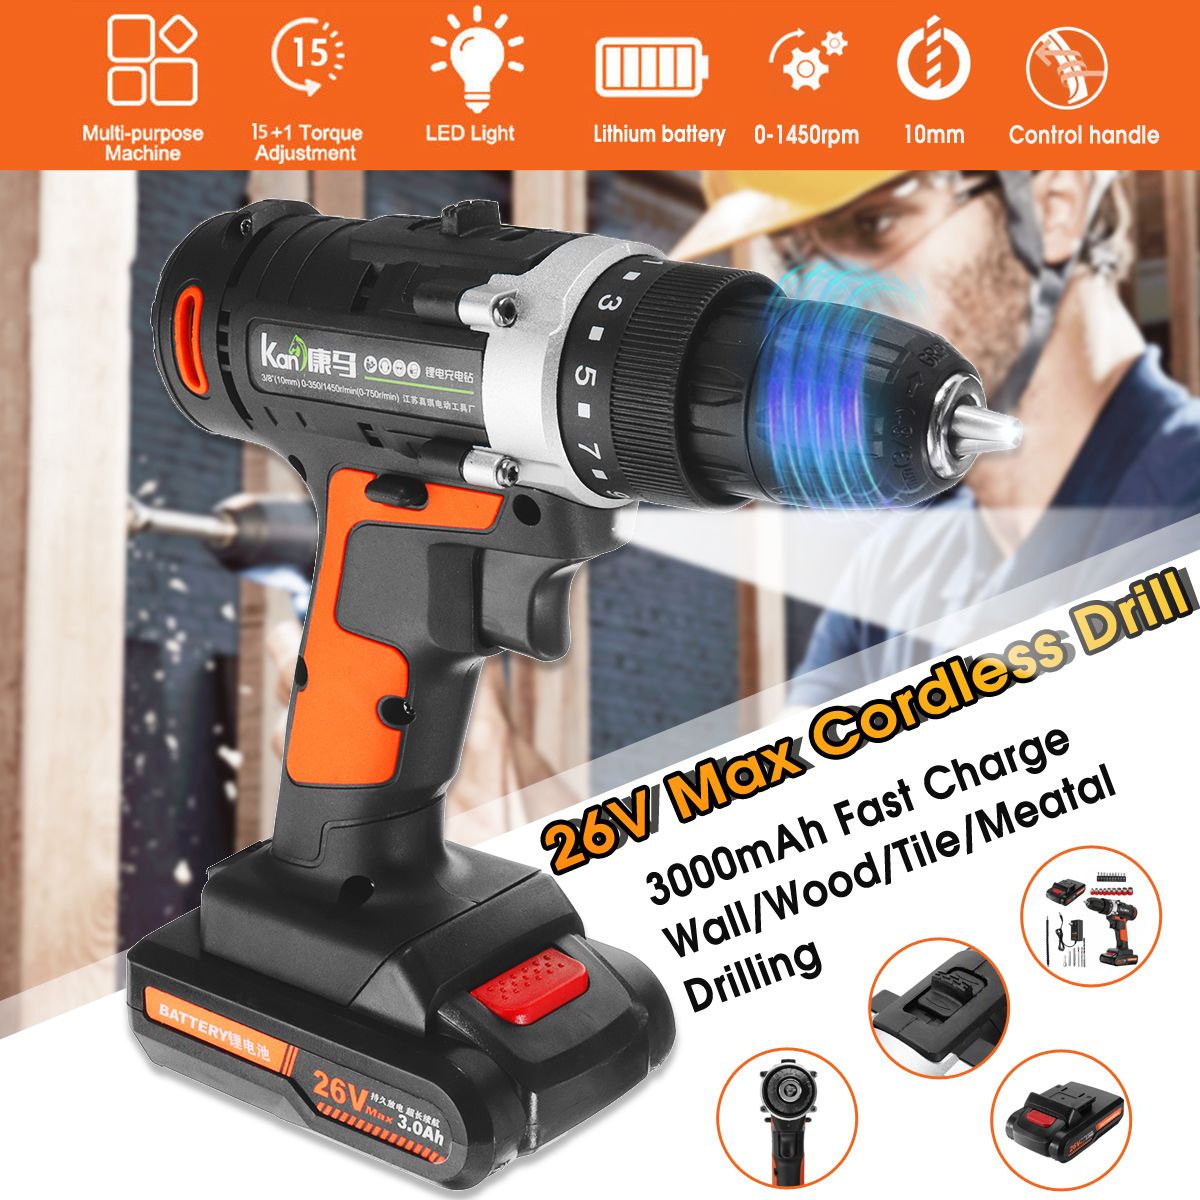 26V-350Nm-Cordless-Electric-Drill-151-Screw-Driver-Kit-with-3000mAh-Lithium-Battery-1403720